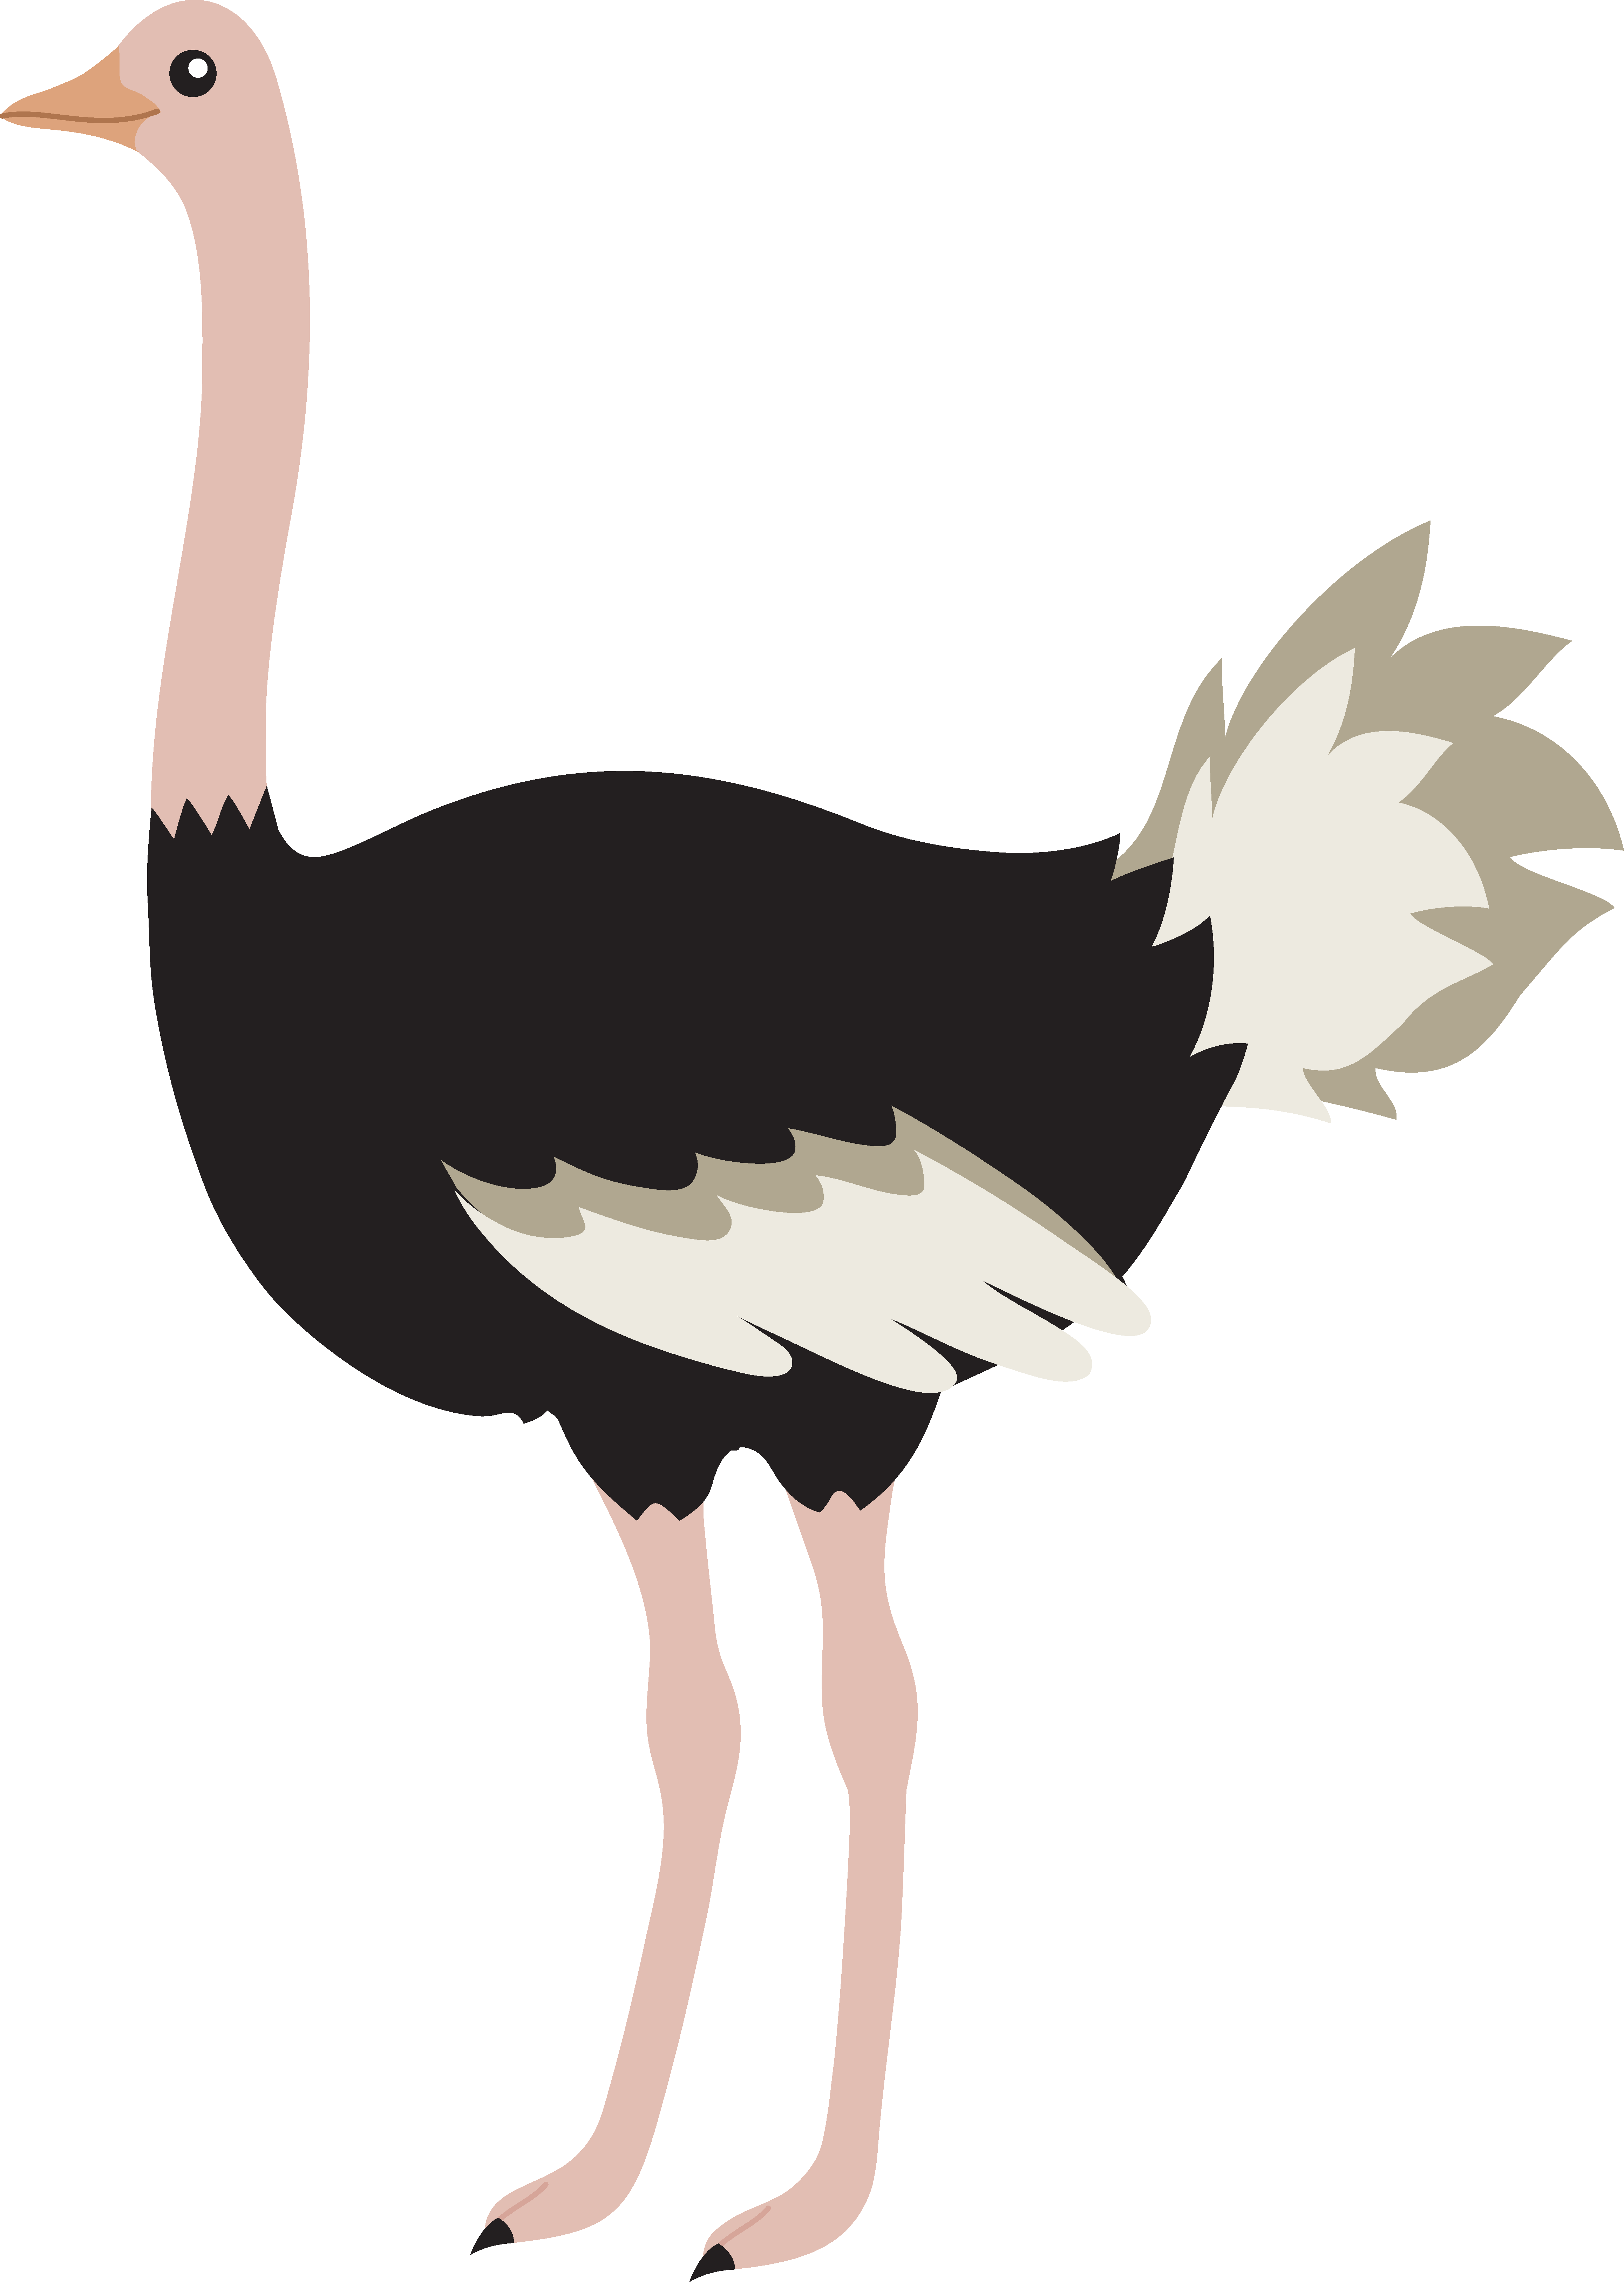 Cute Cartoon Ostrich Images & Pictures - Becuo